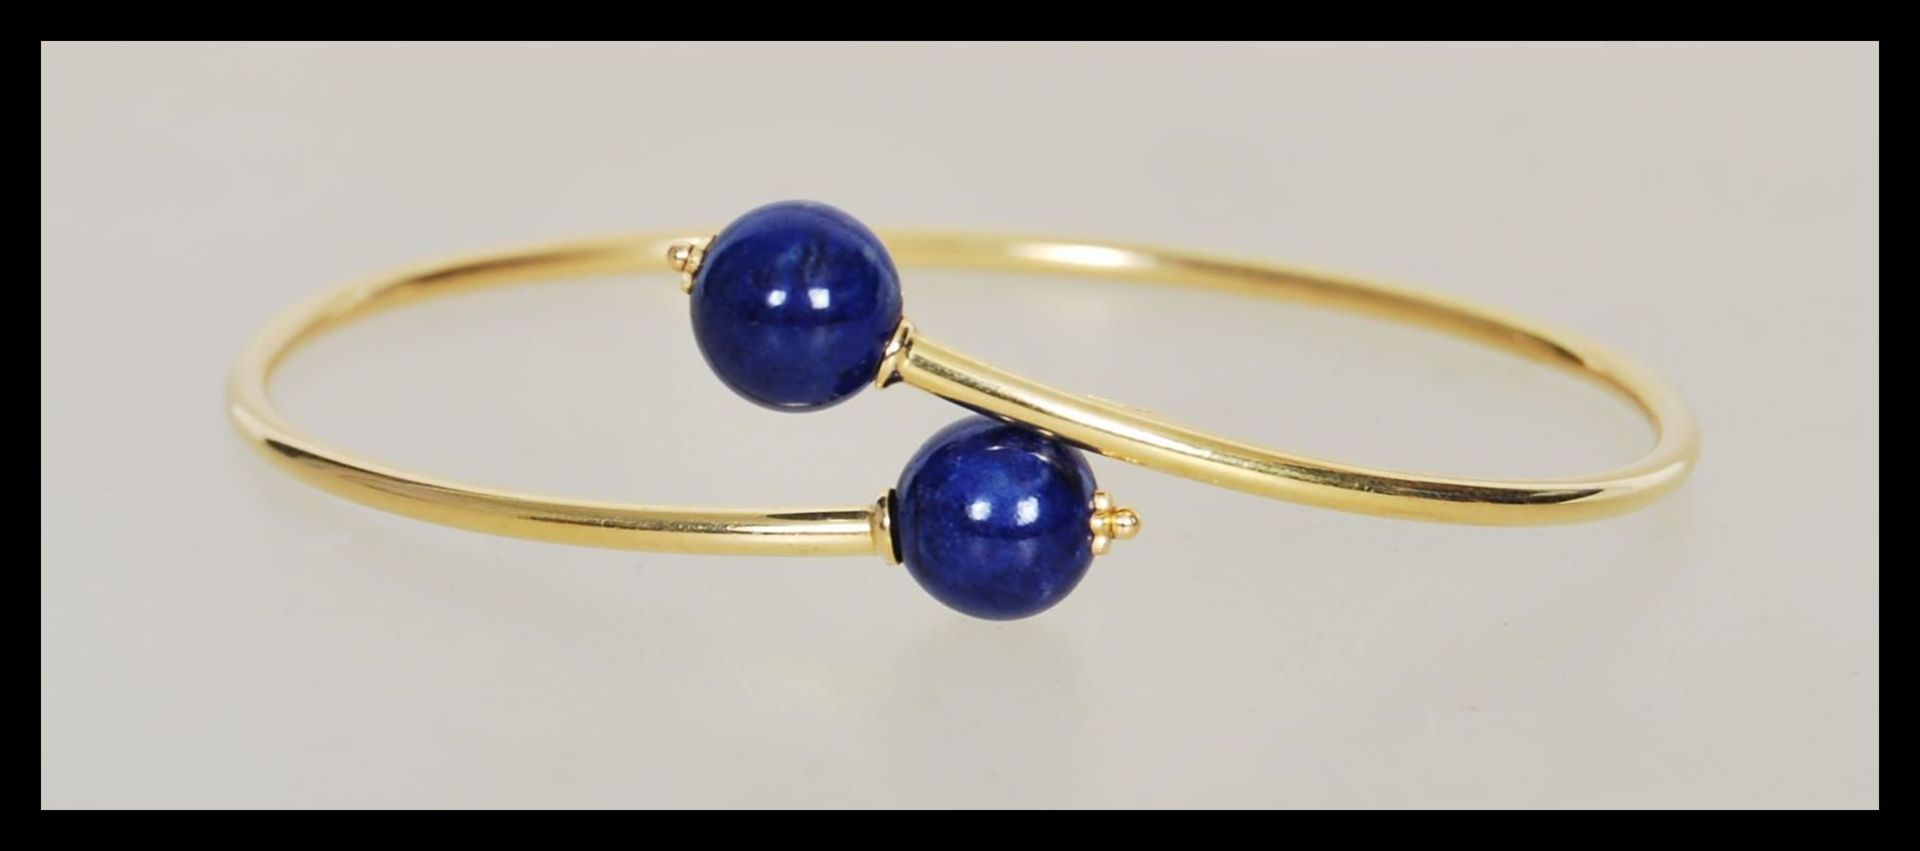 A stamped 750 18ct gold bangle bracelet finished with two blue bead stoppers. Weight 4.3g.